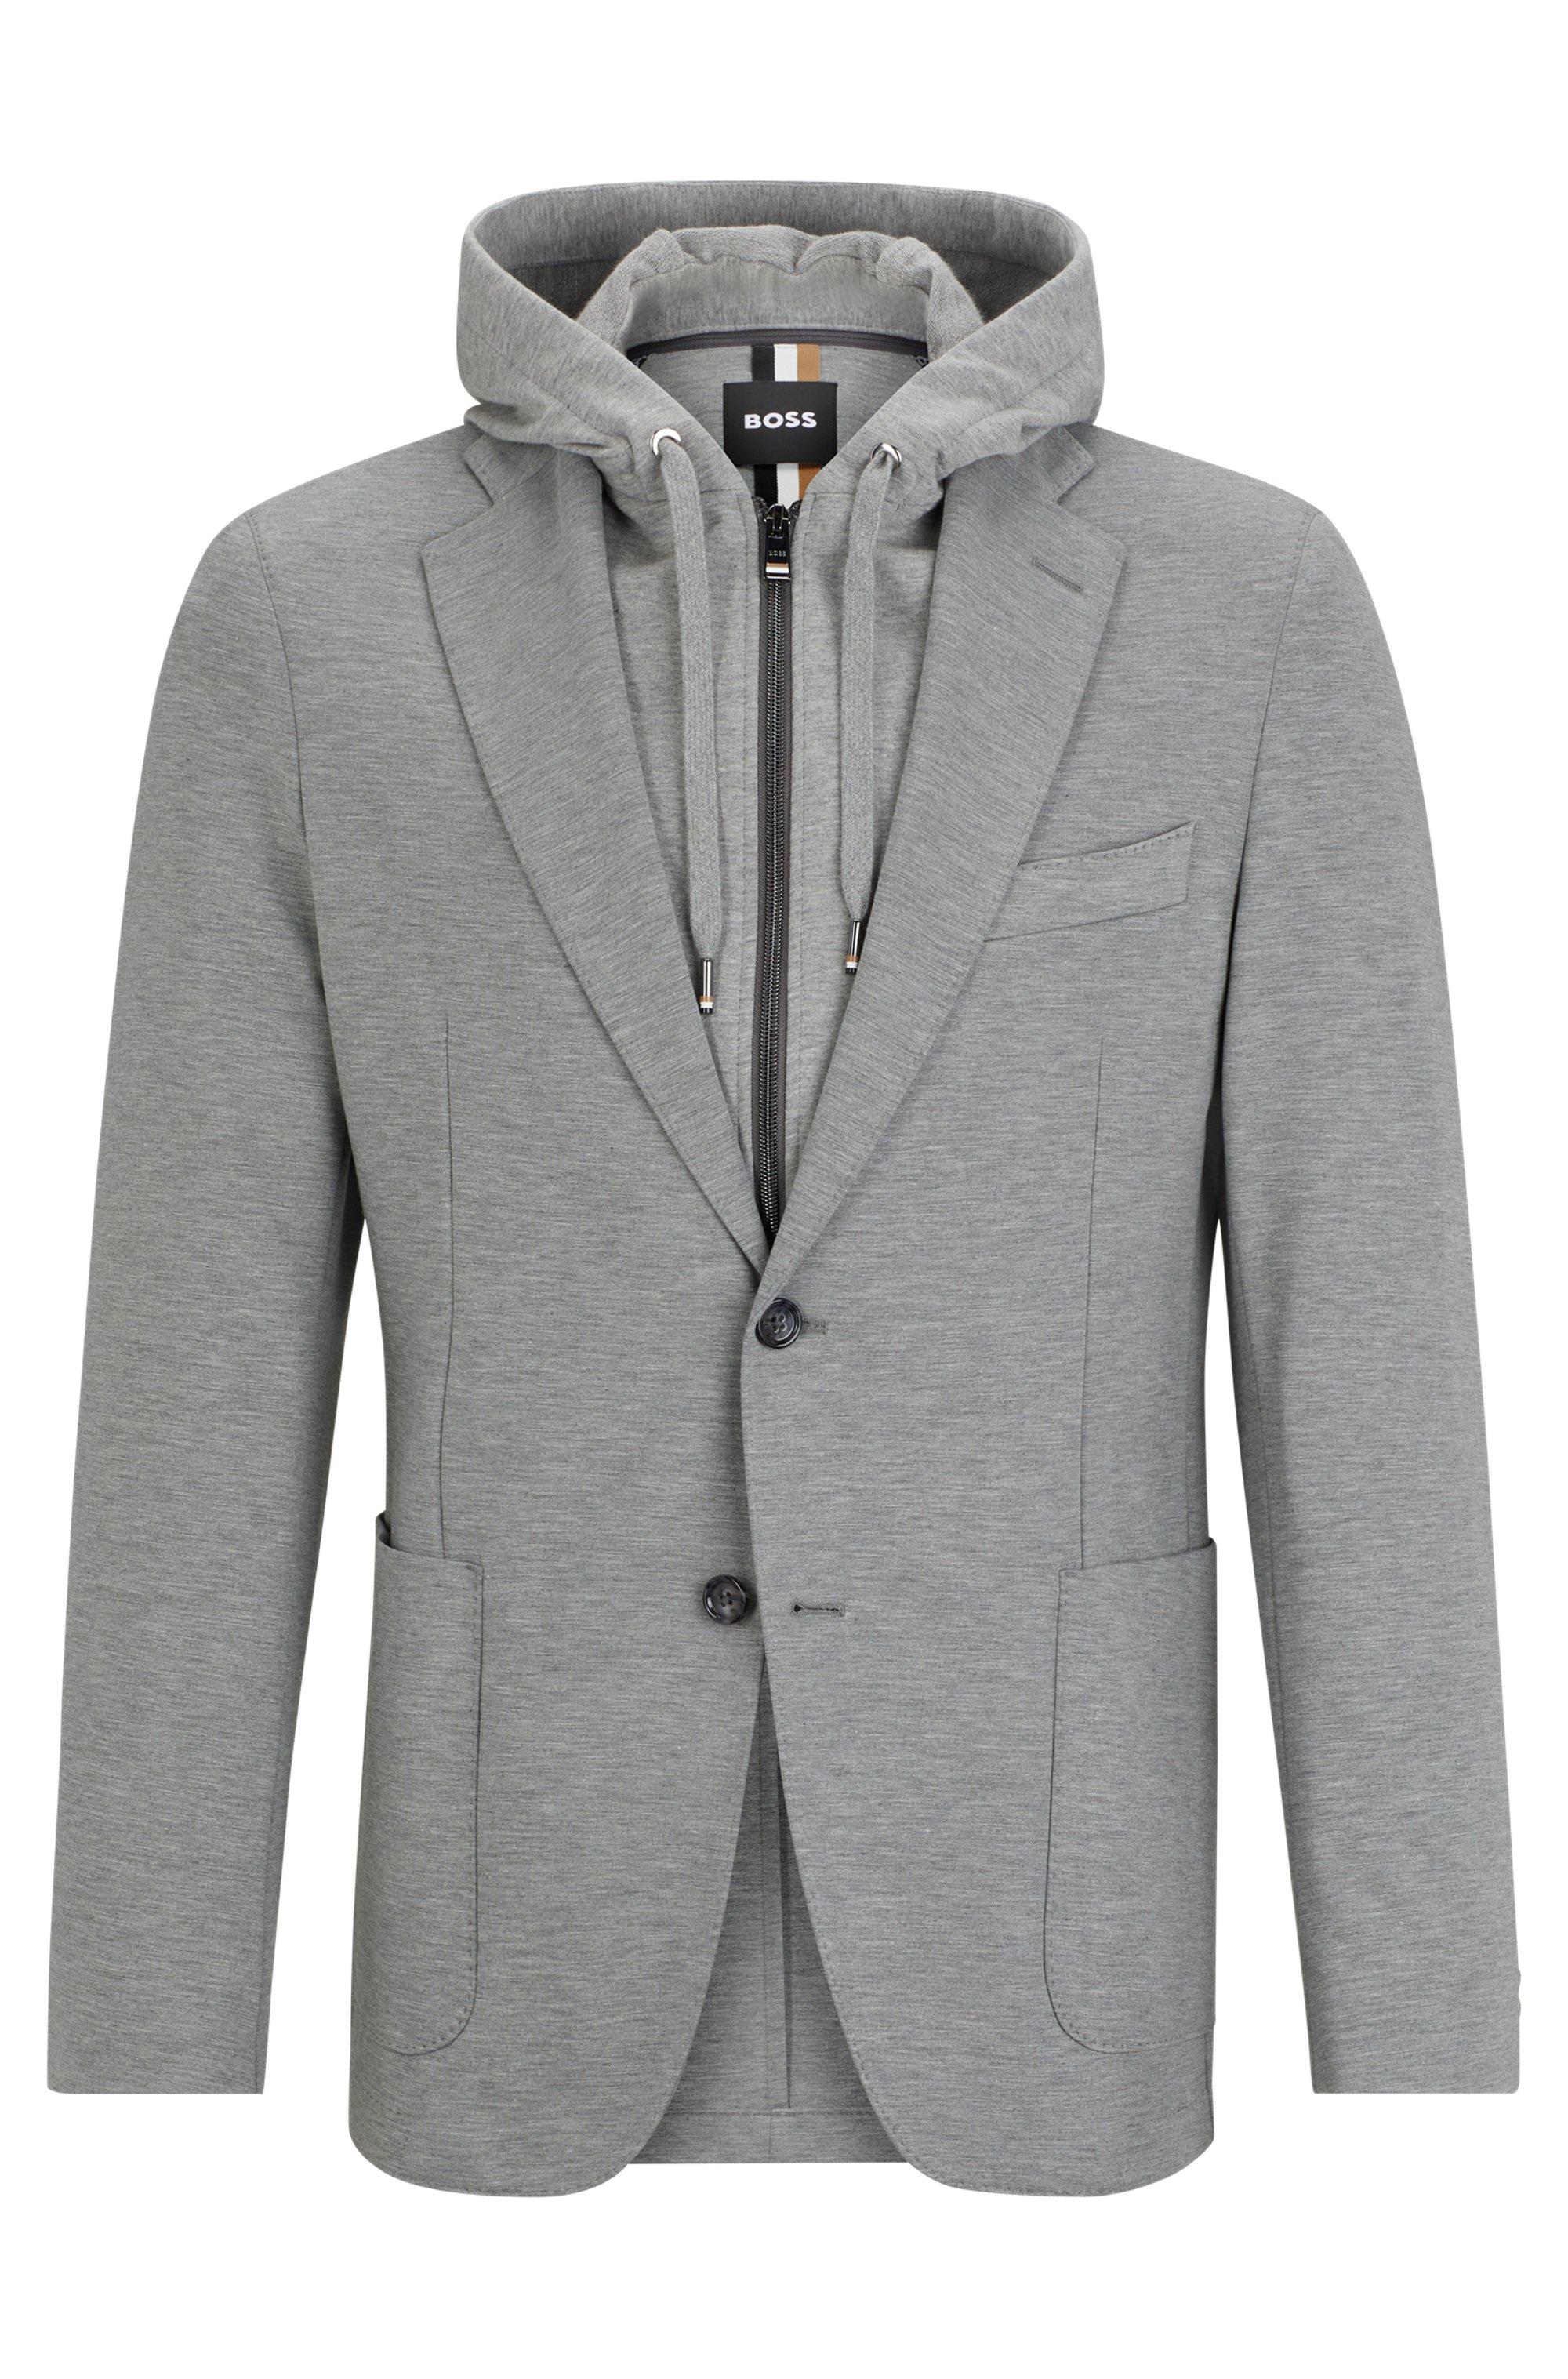 BOSS by HUGO BOSS Slim-fit Jacket With Zip-up Hooded Inner in Gray for Men  | Lyst